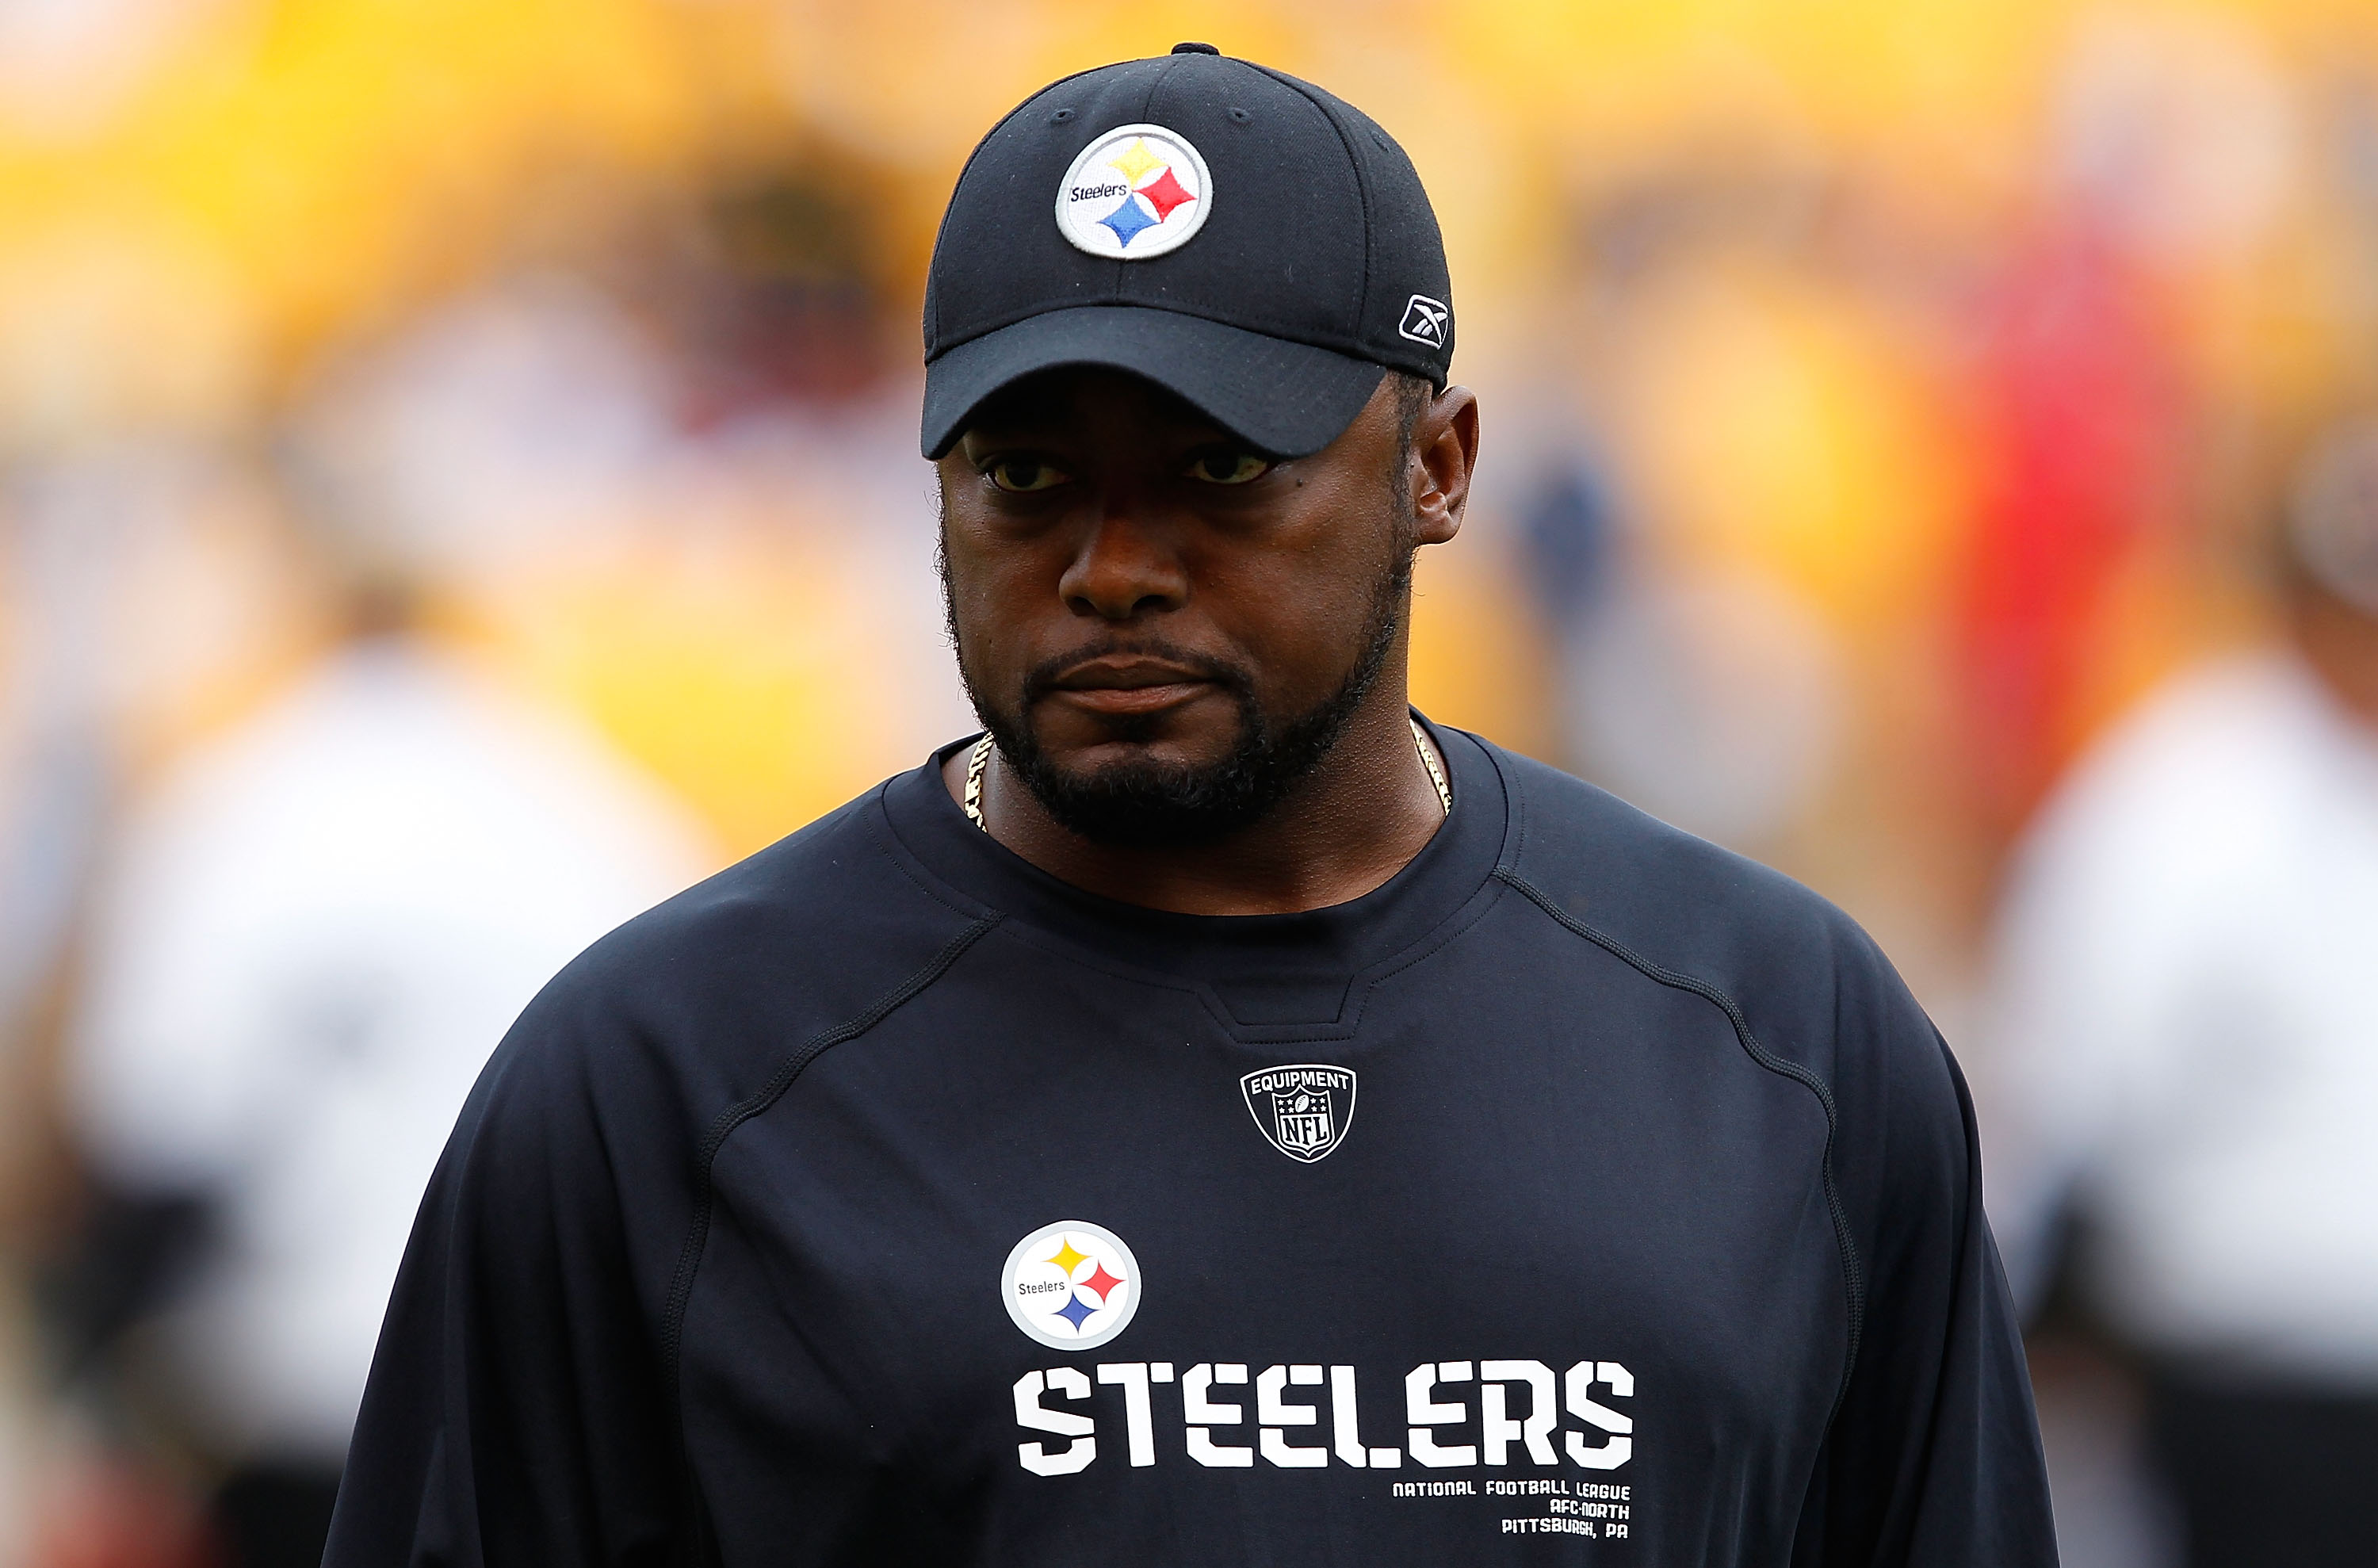 PITTSBURGH - SEPTEMBER 12:  Head coach Mike Tomlin of the Pittsburgh Steelers watches his team warmup prior to the NFL season opener game against the Atlanta Falcons on September 12, 2010 at Heinz Field in Pittsburgh, Pennsylvania.  (Photo by Jared Wicker